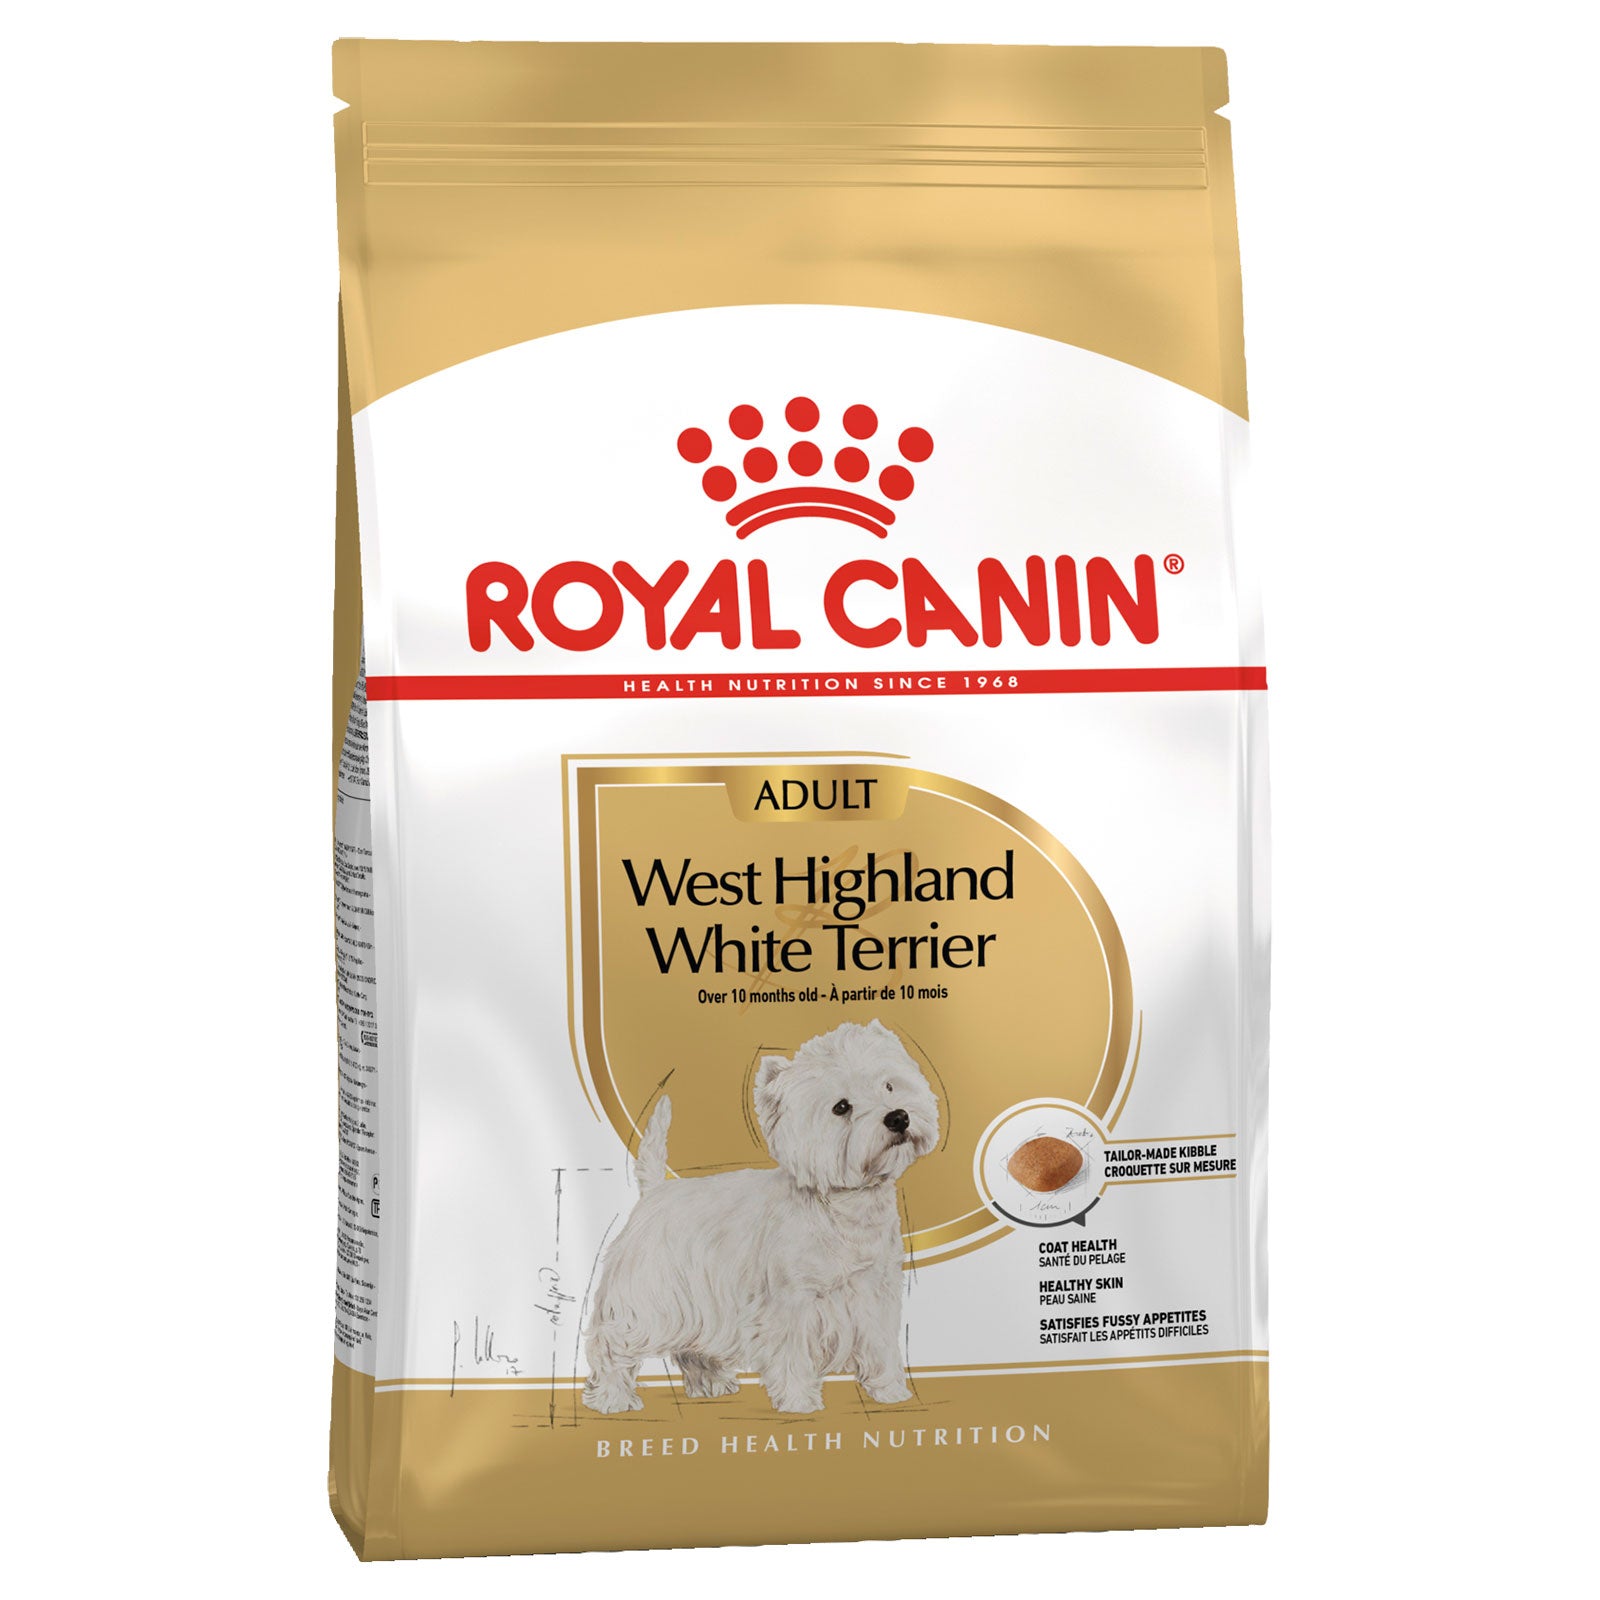 Royal Canin Dog Food Adult West Highland White Terrier